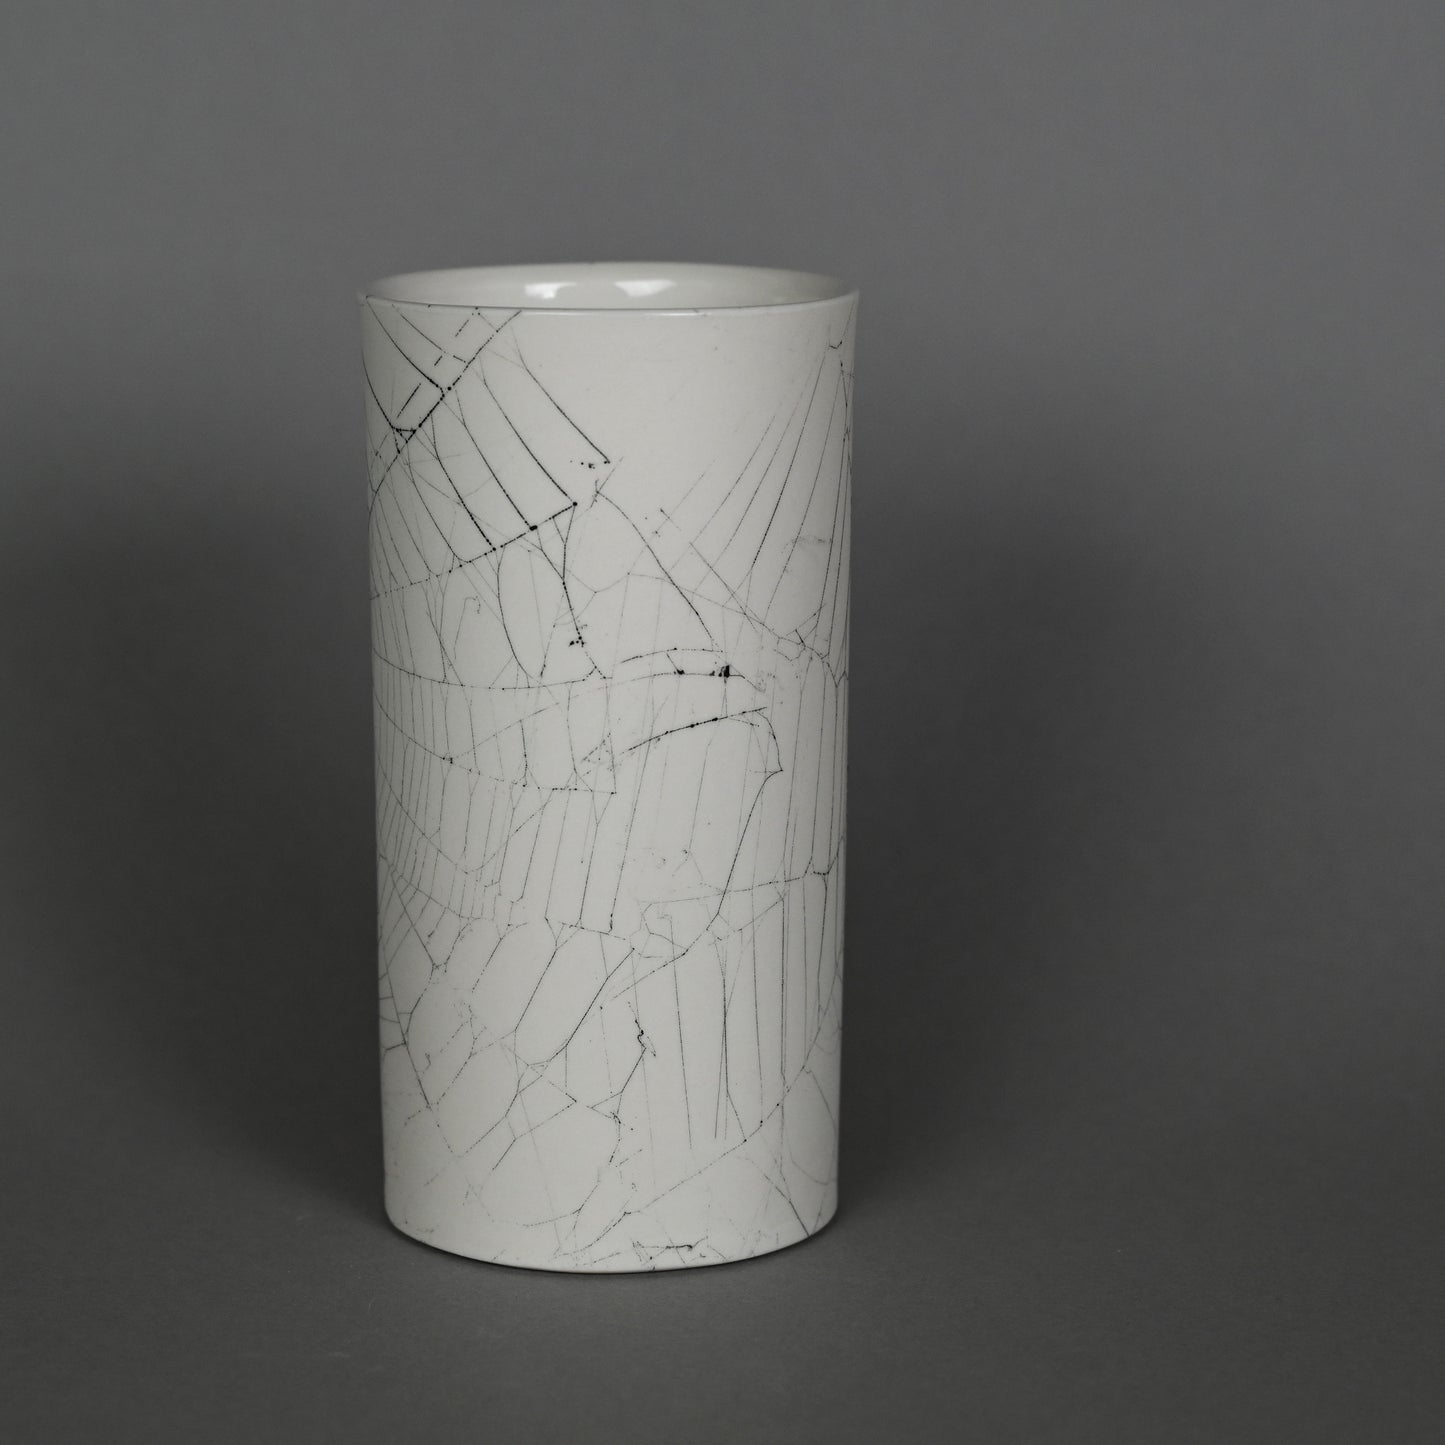 Web on Clay (194), Collected September 19, 2022